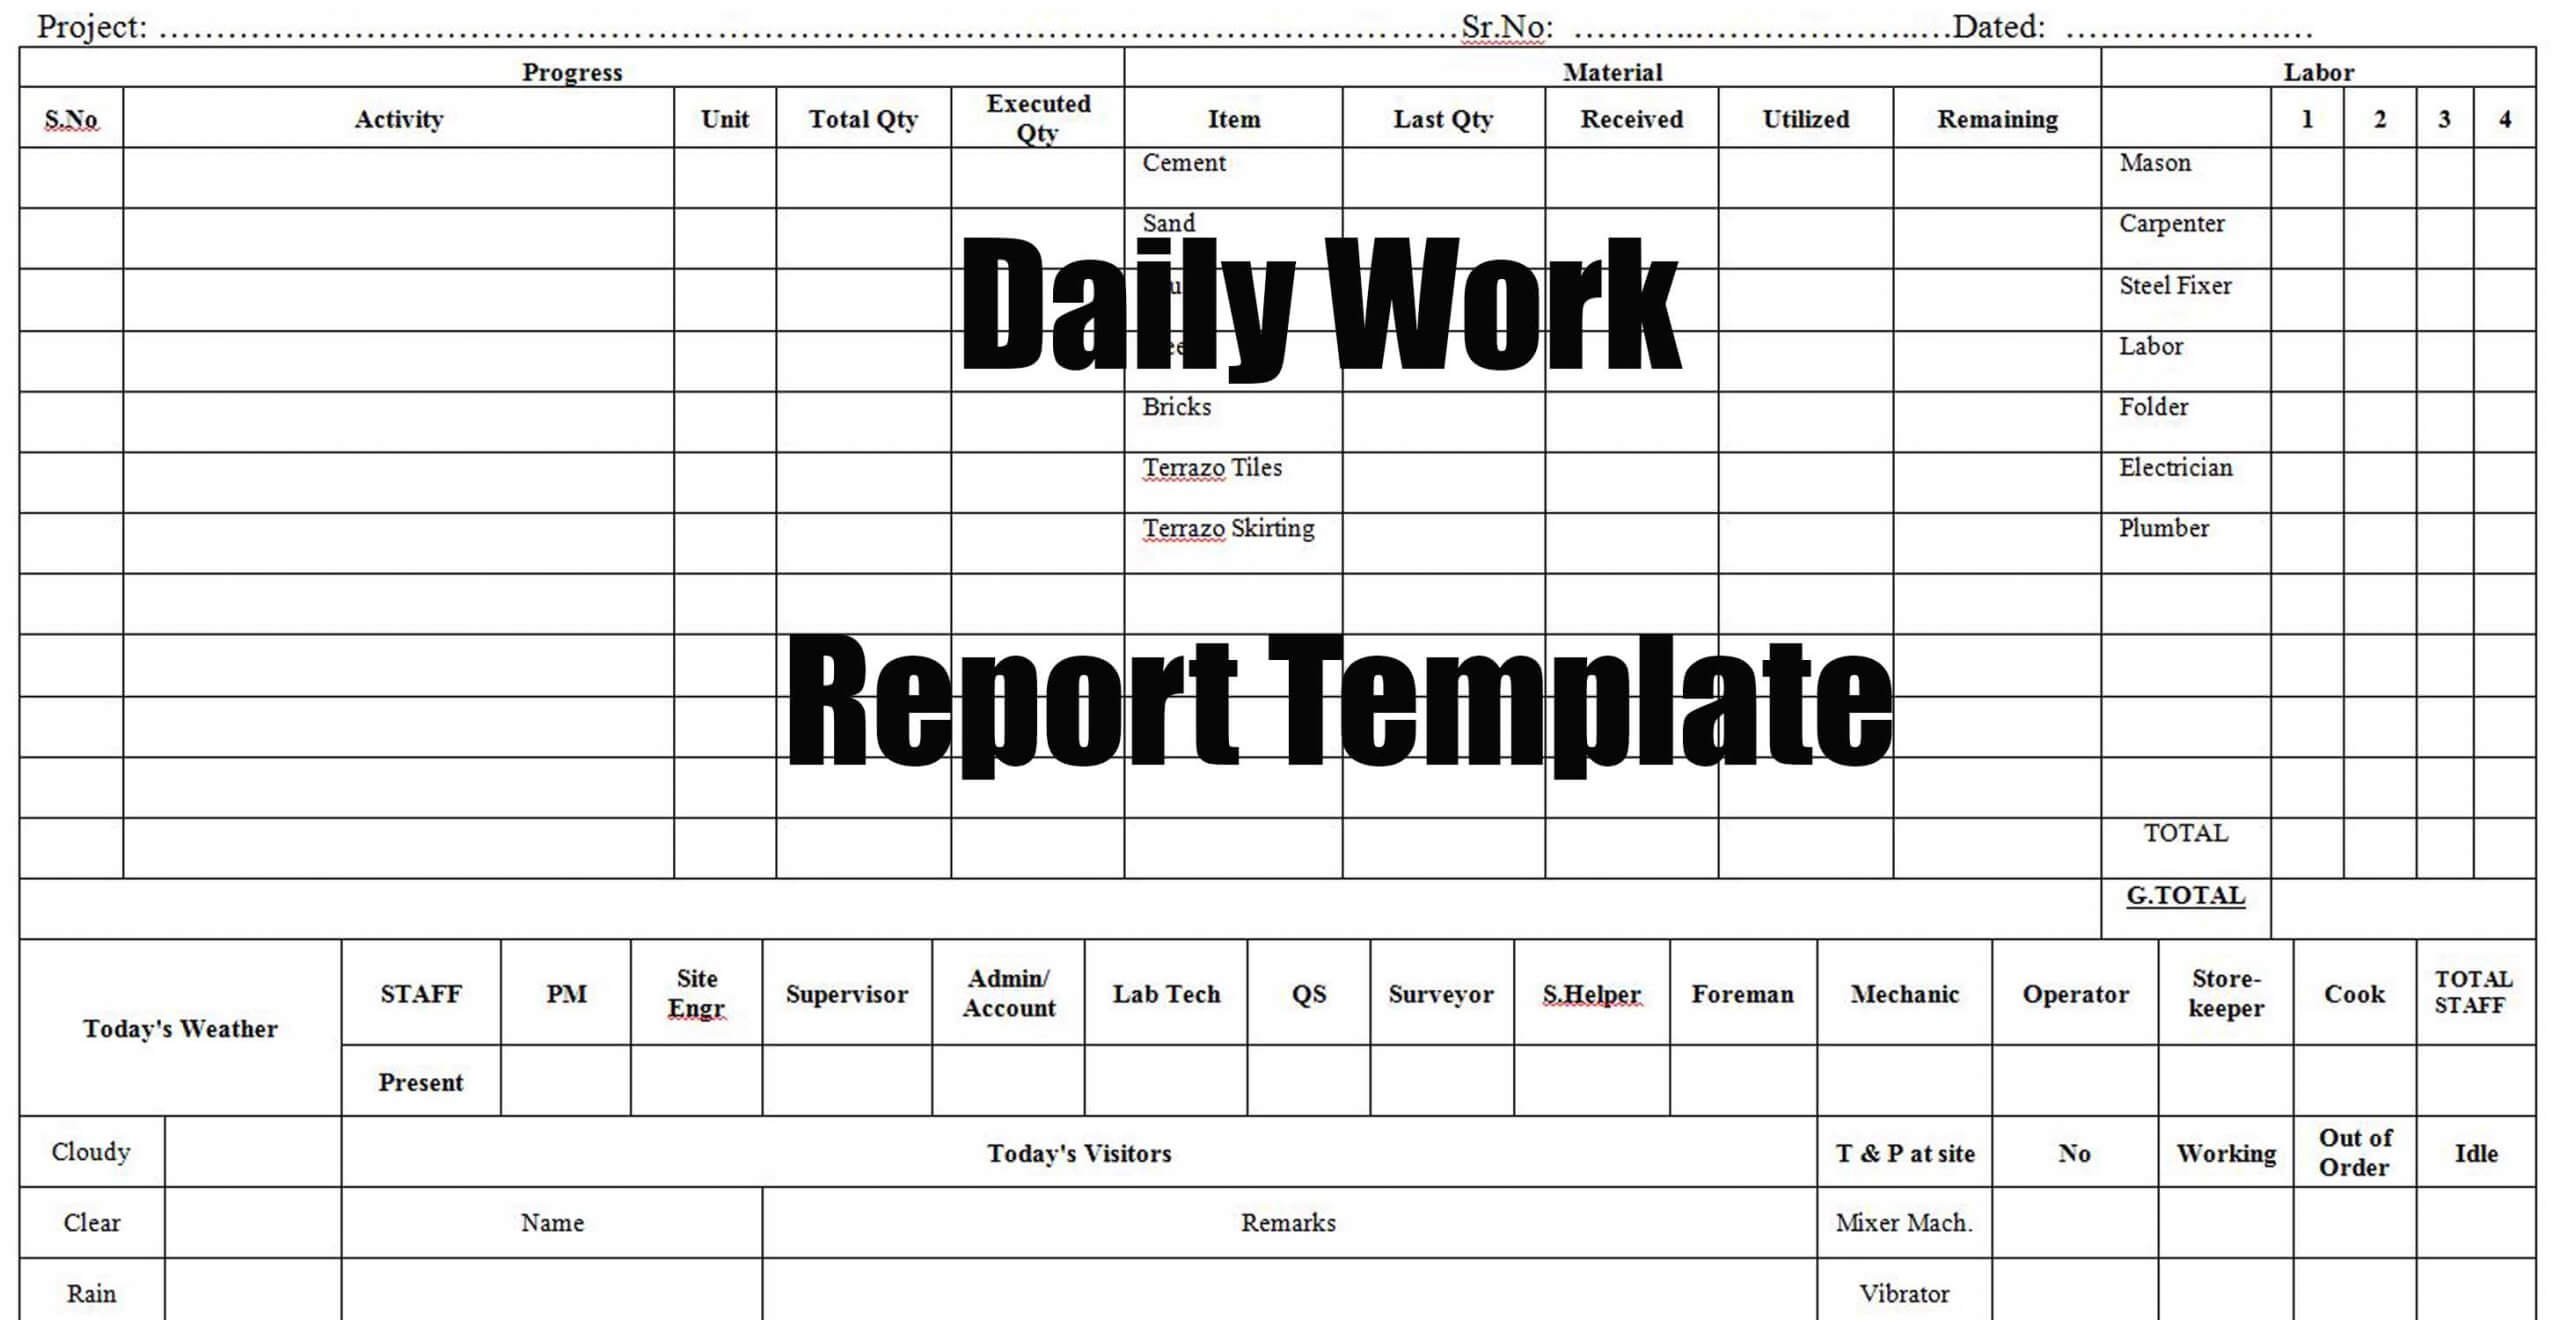 Daily Work Report Template - Engineering Discoveries In Daily Work Report Template